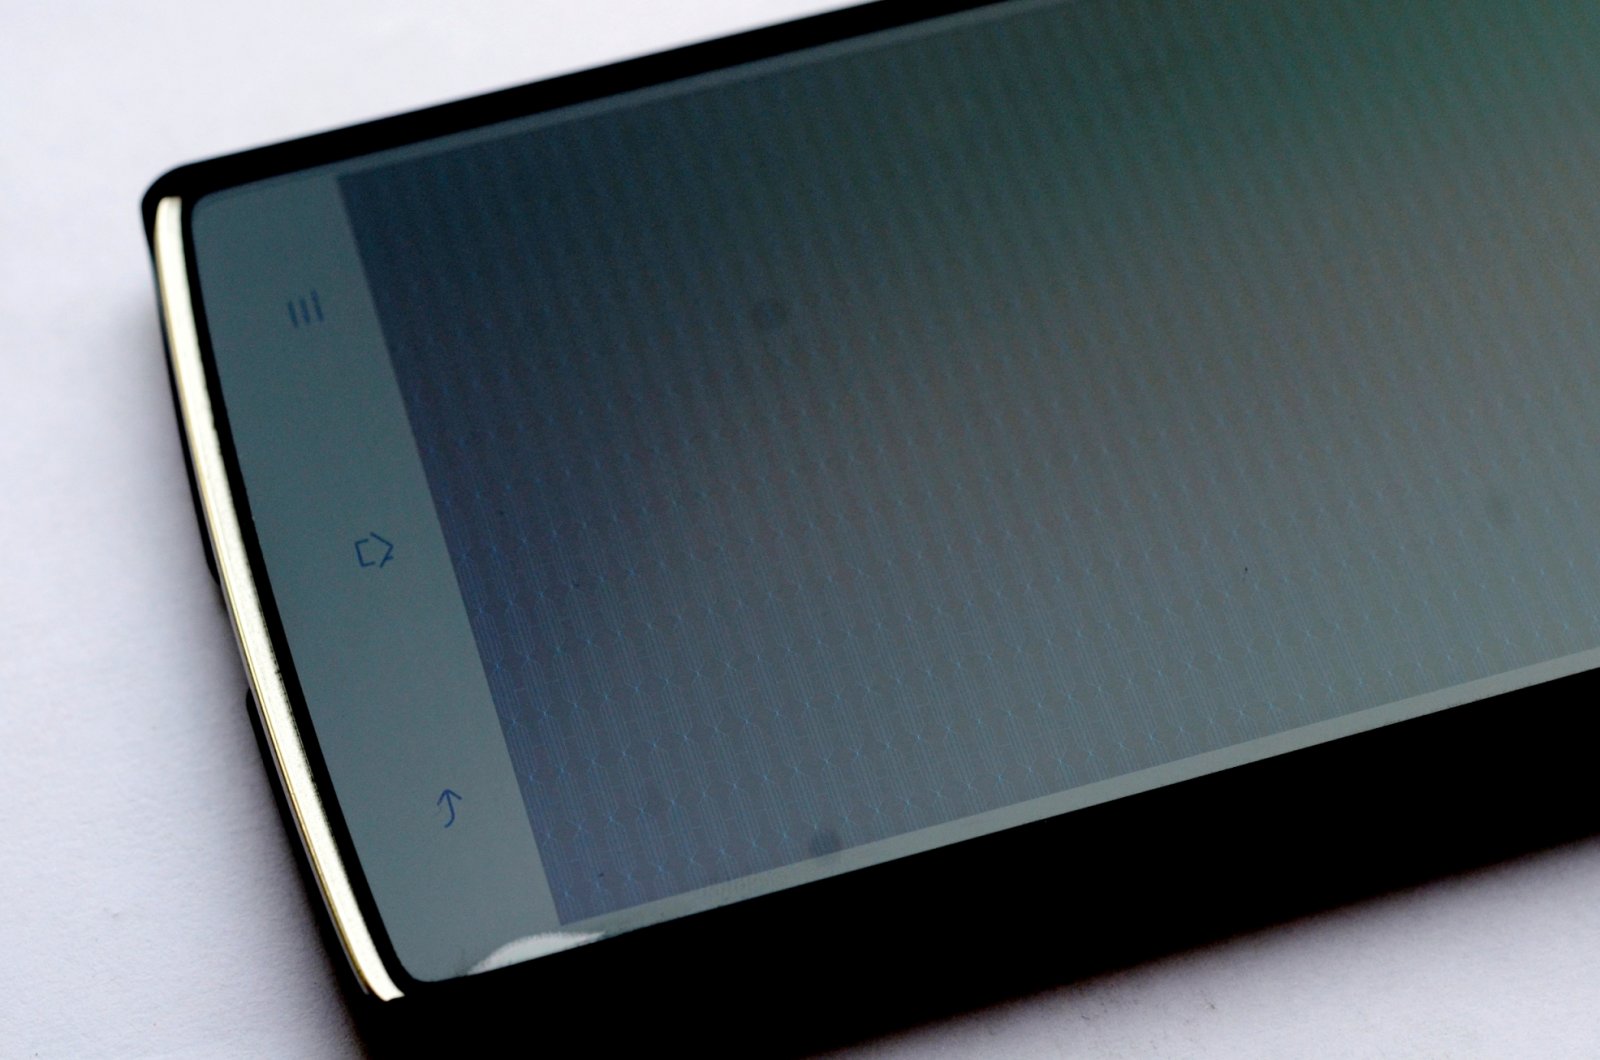 Touch Panel on Oneplus one zoom0011.jpg